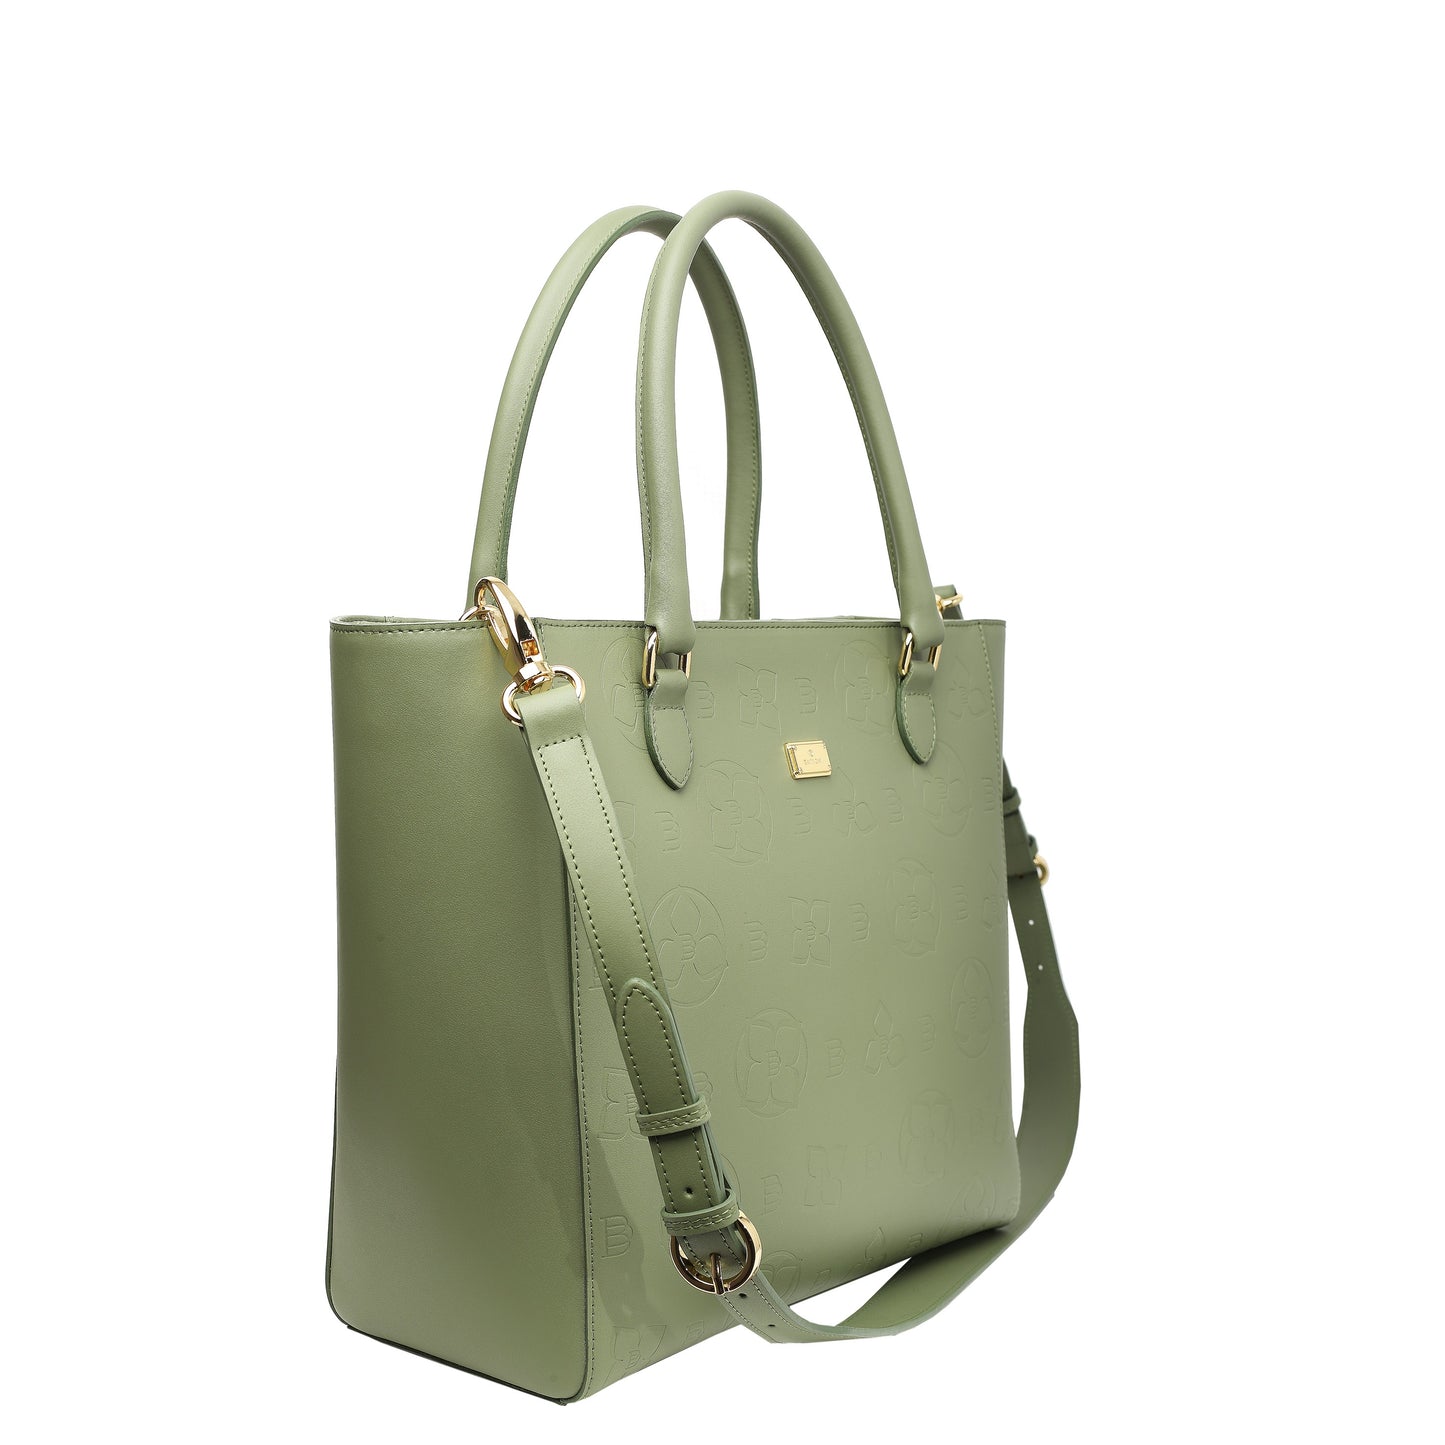 Stampia L nappa olive women's leather bag